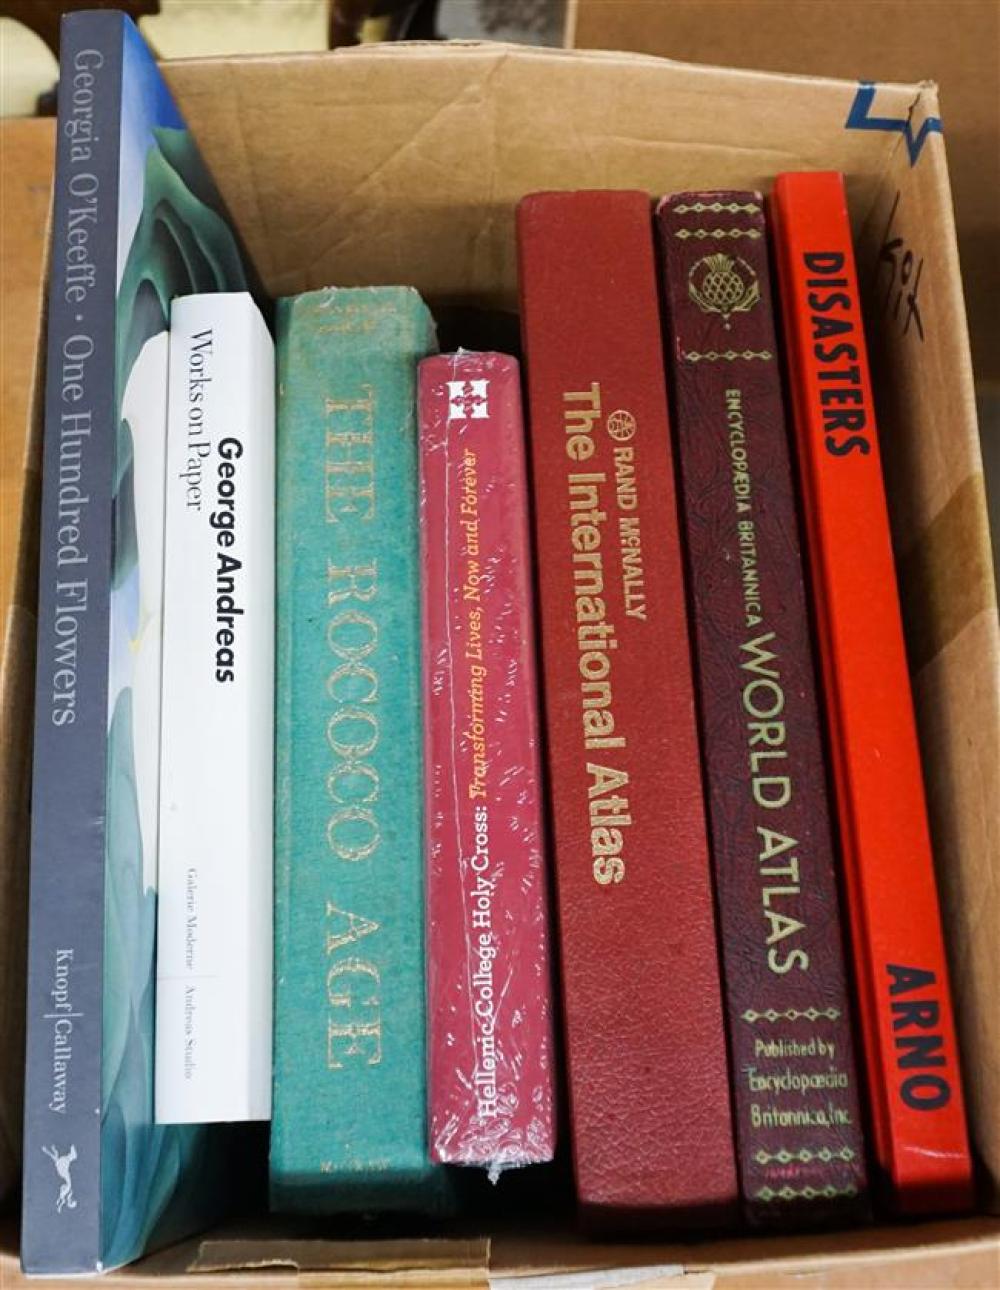 BOX WITH SIX BOOKSBox with Six